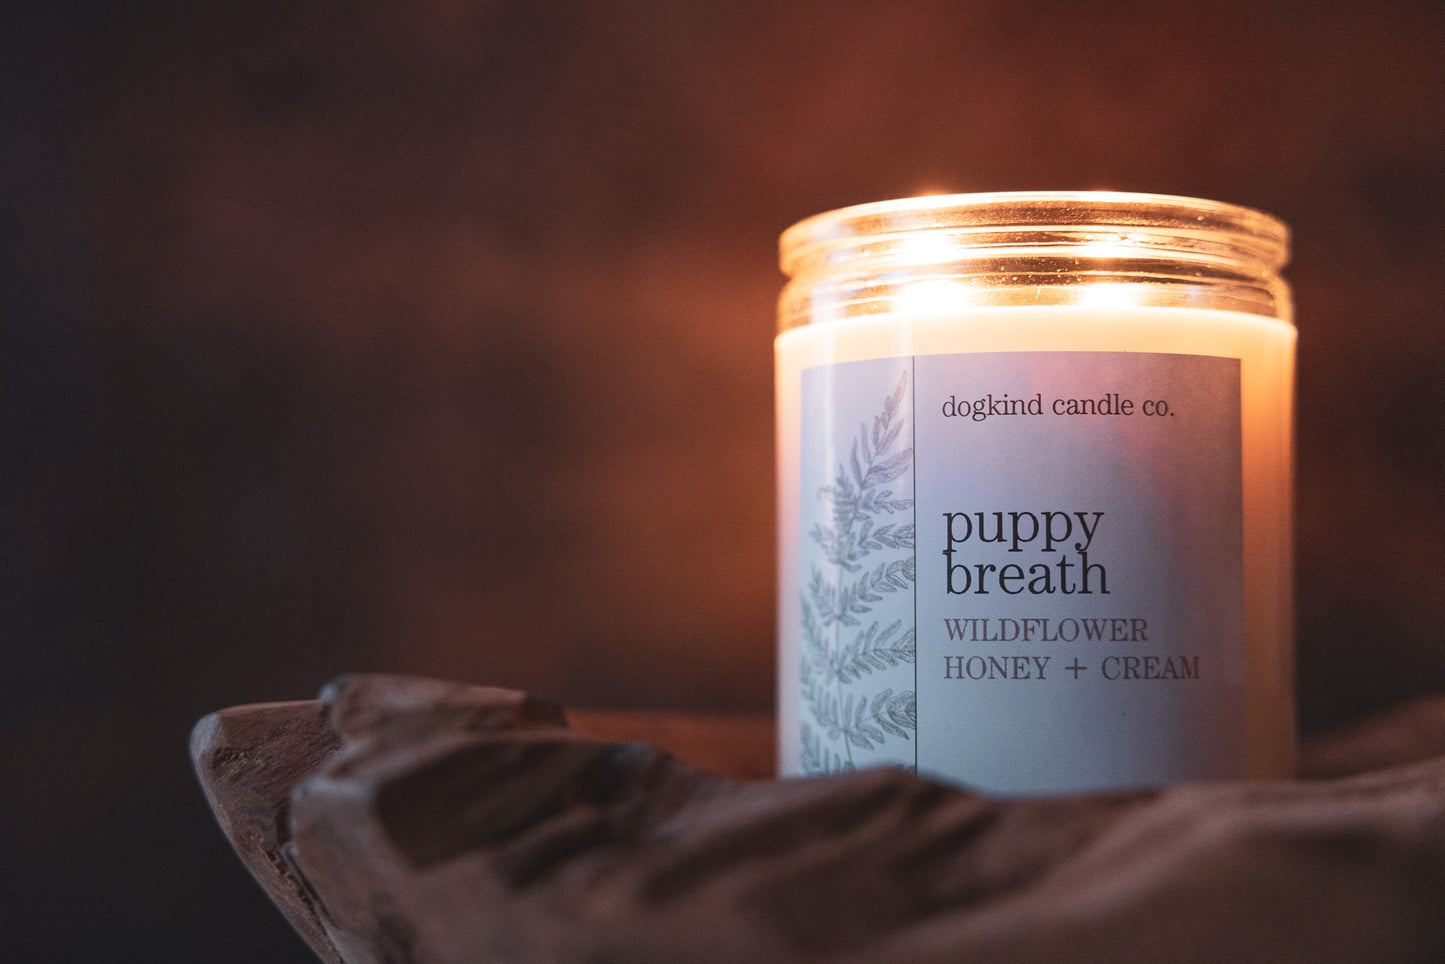 Dogkind Candle Co.